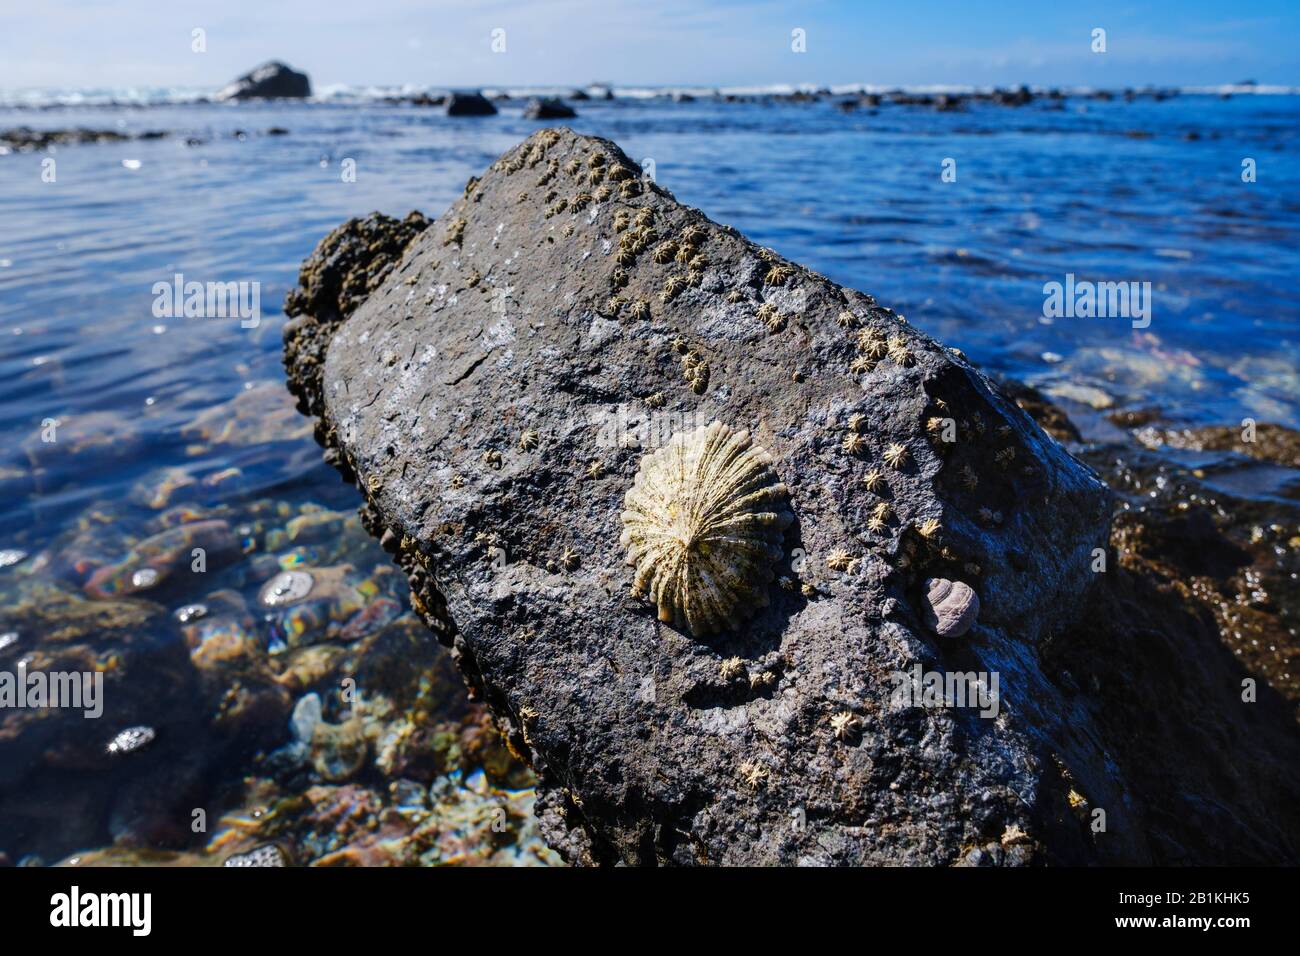 Limpet (Patellidae) on stone in surf zone, Valle Gran Rey, La Gomera, Canary Islands, Spain Stock Photo